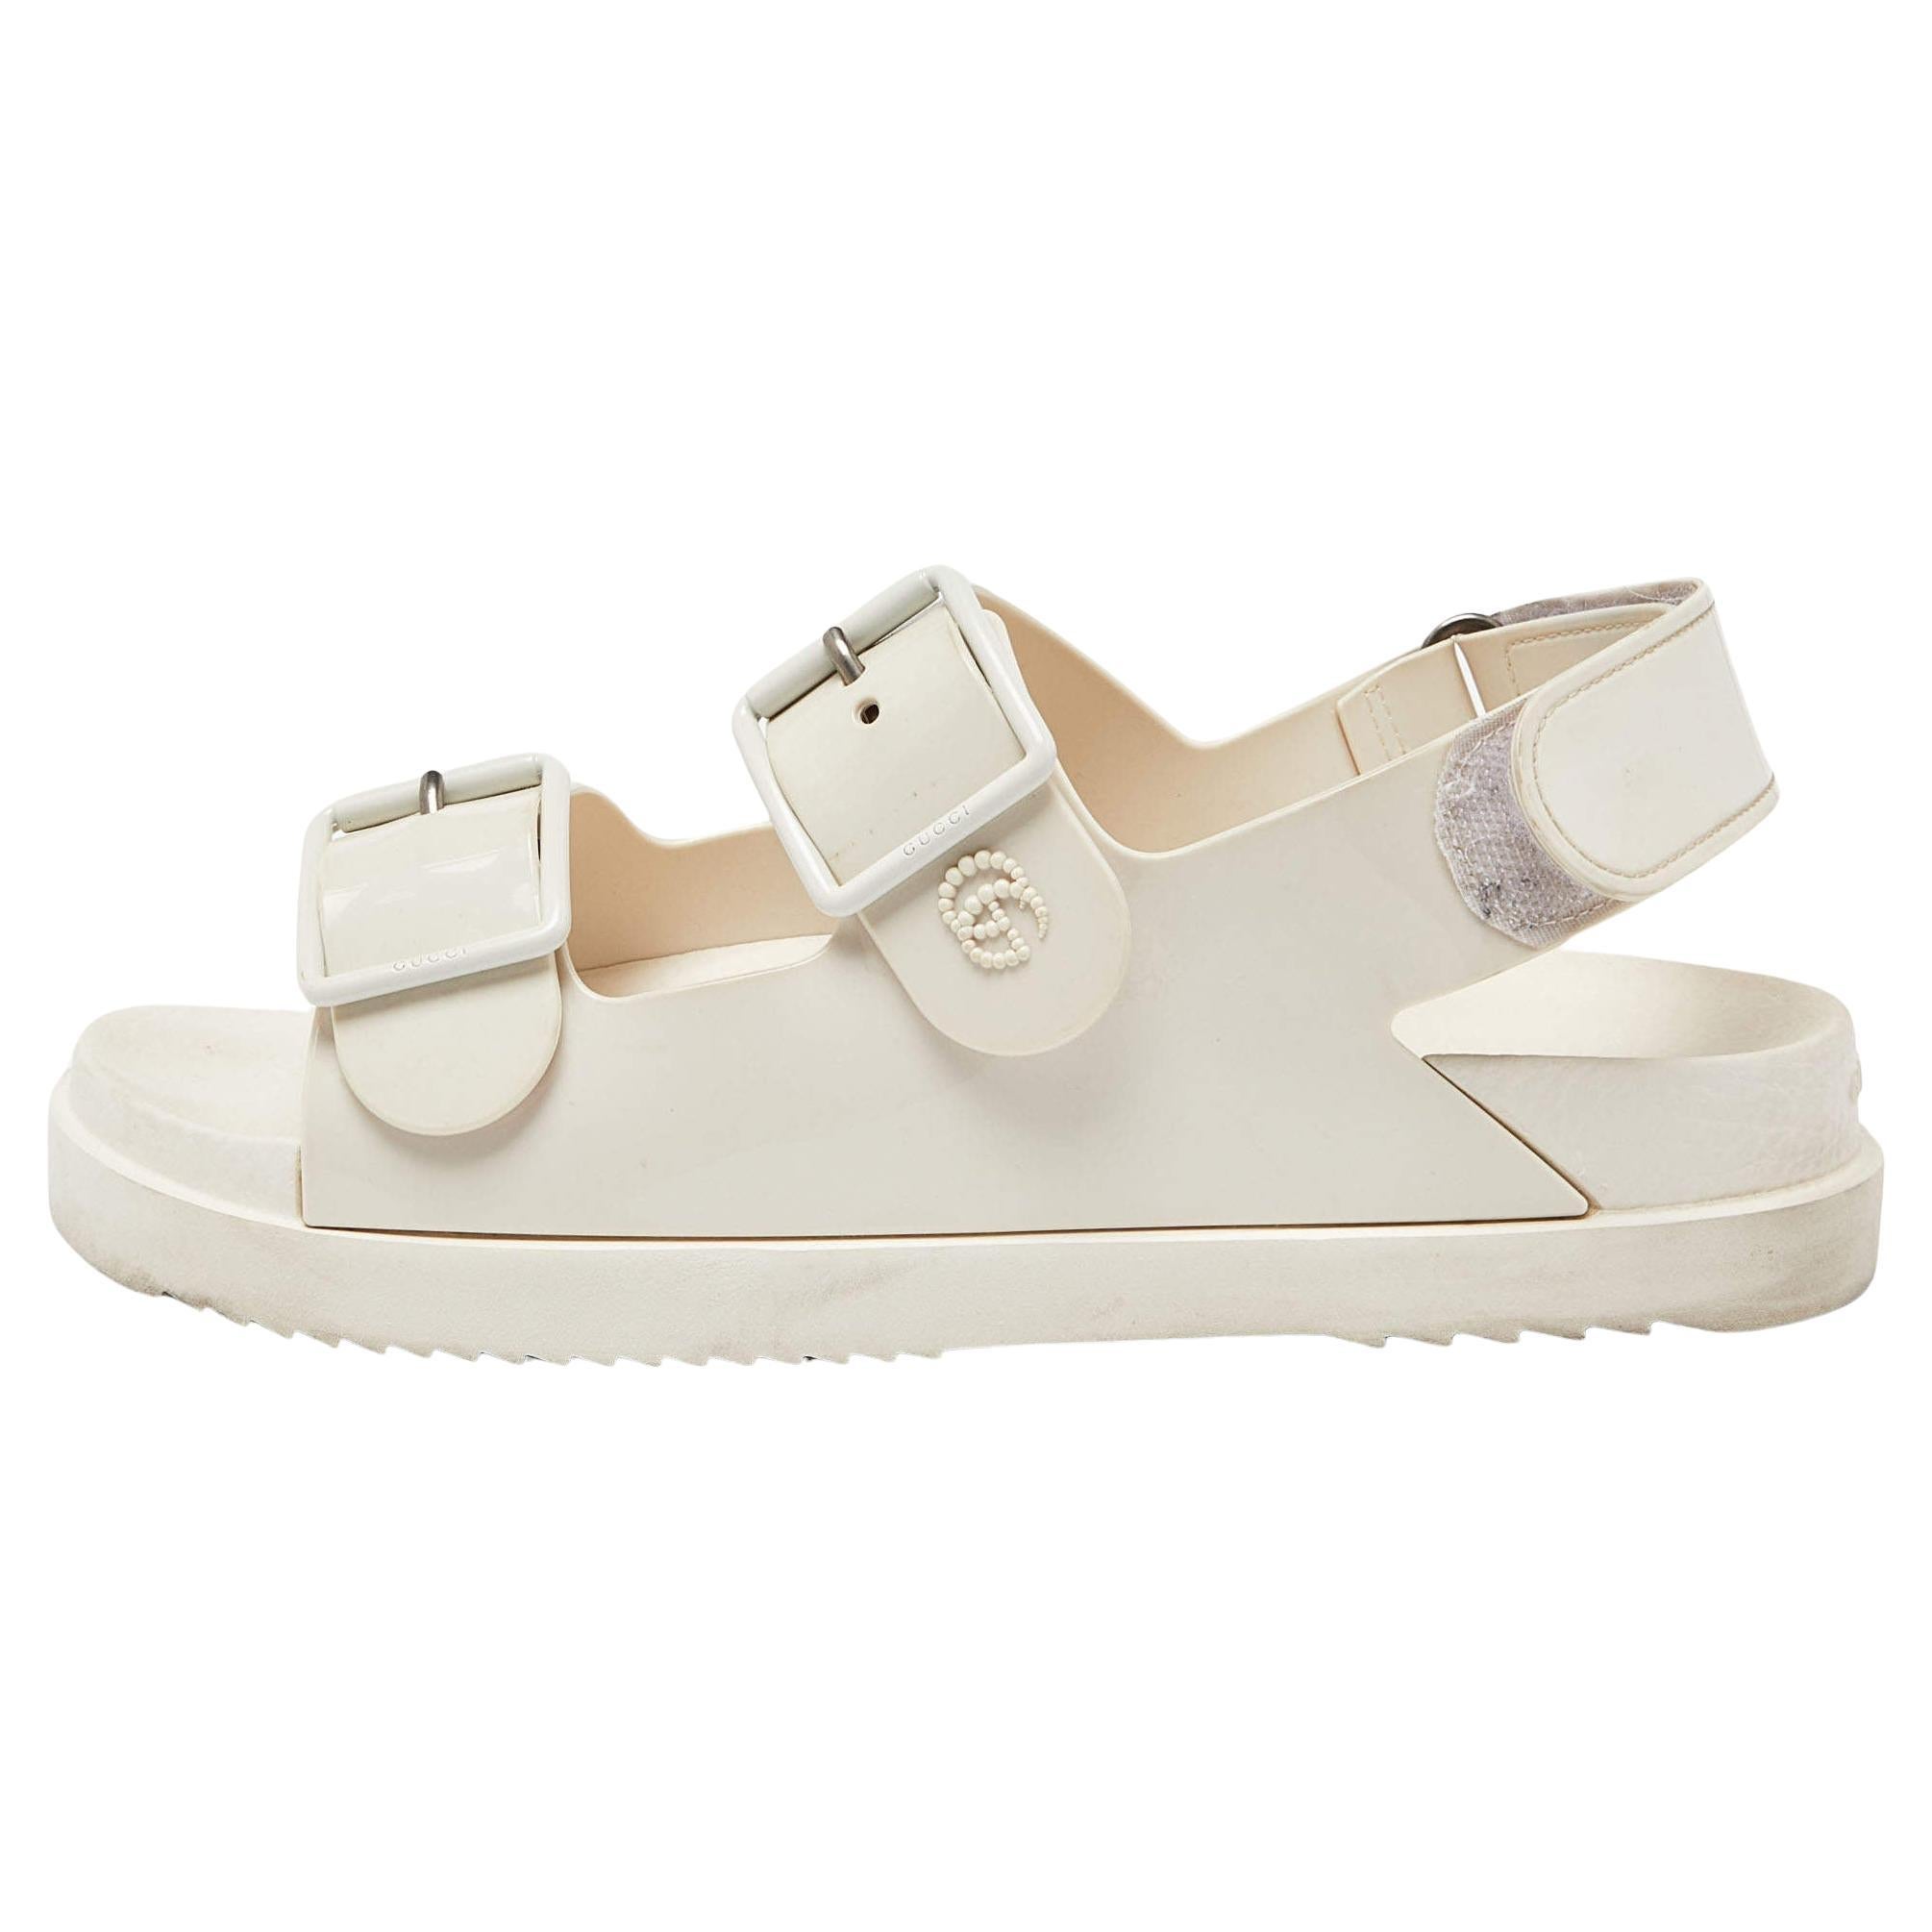 Gucci Off White Rubber Mini Double G Logo Dusty Ankle Strap Flat Sandals Size 38